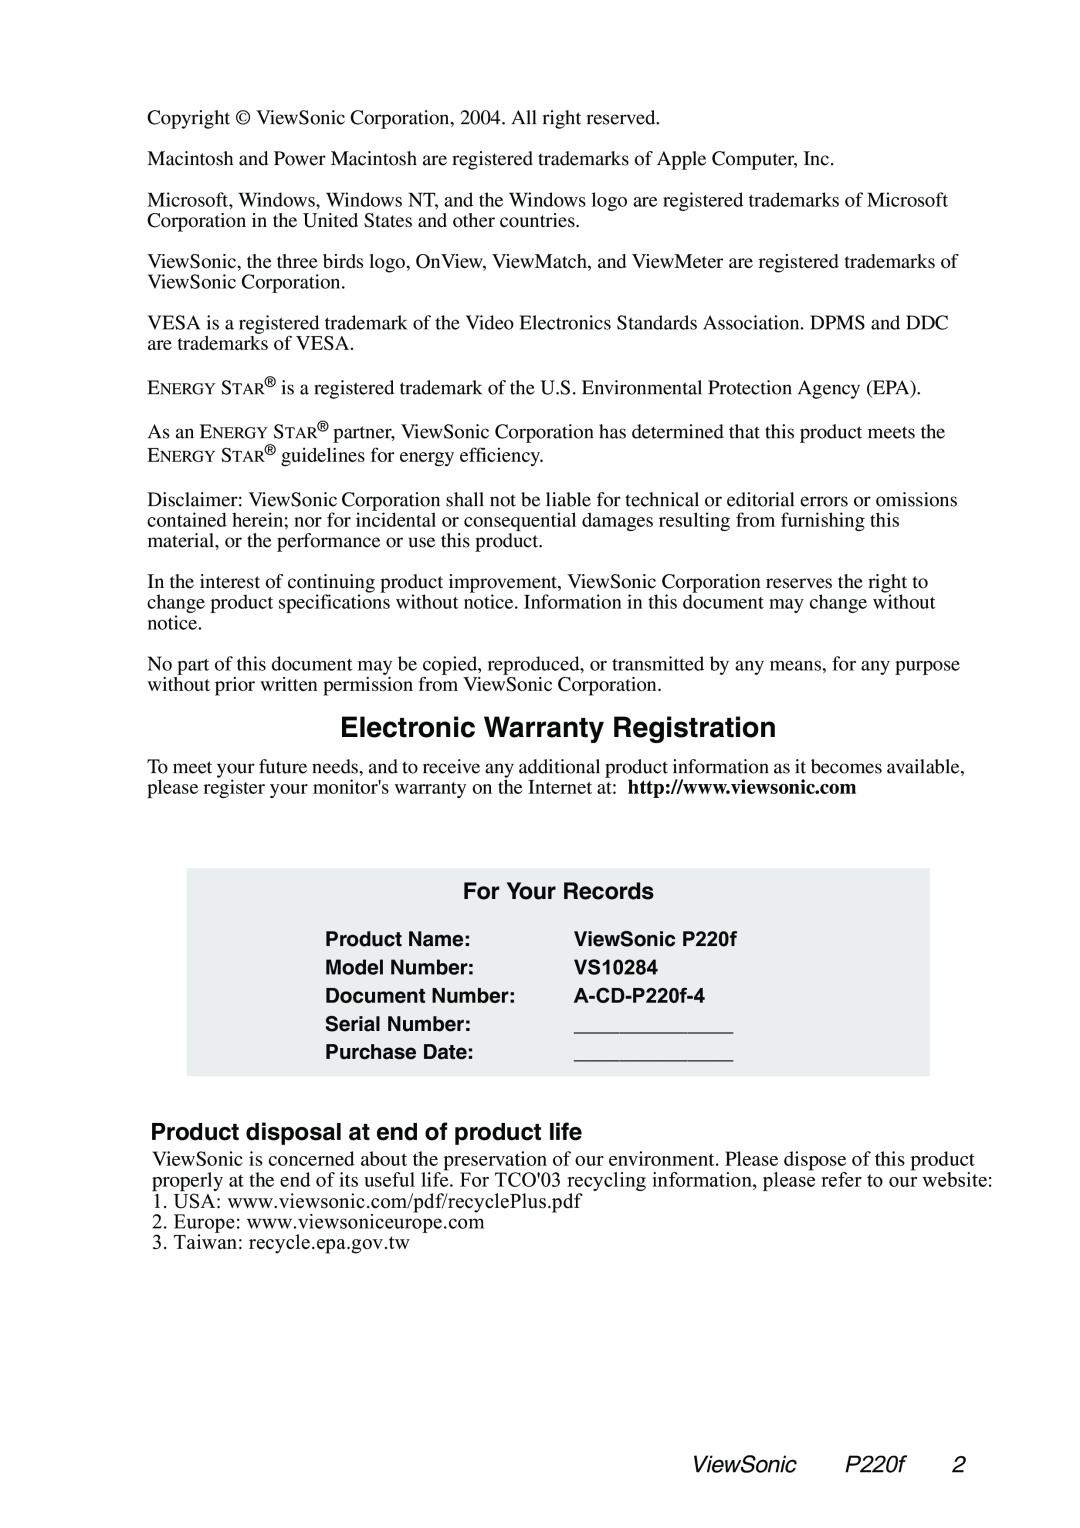 ViewSonic P220f manual Electronic Warranty Registration, For Your Records, Product disposal at end of product life 